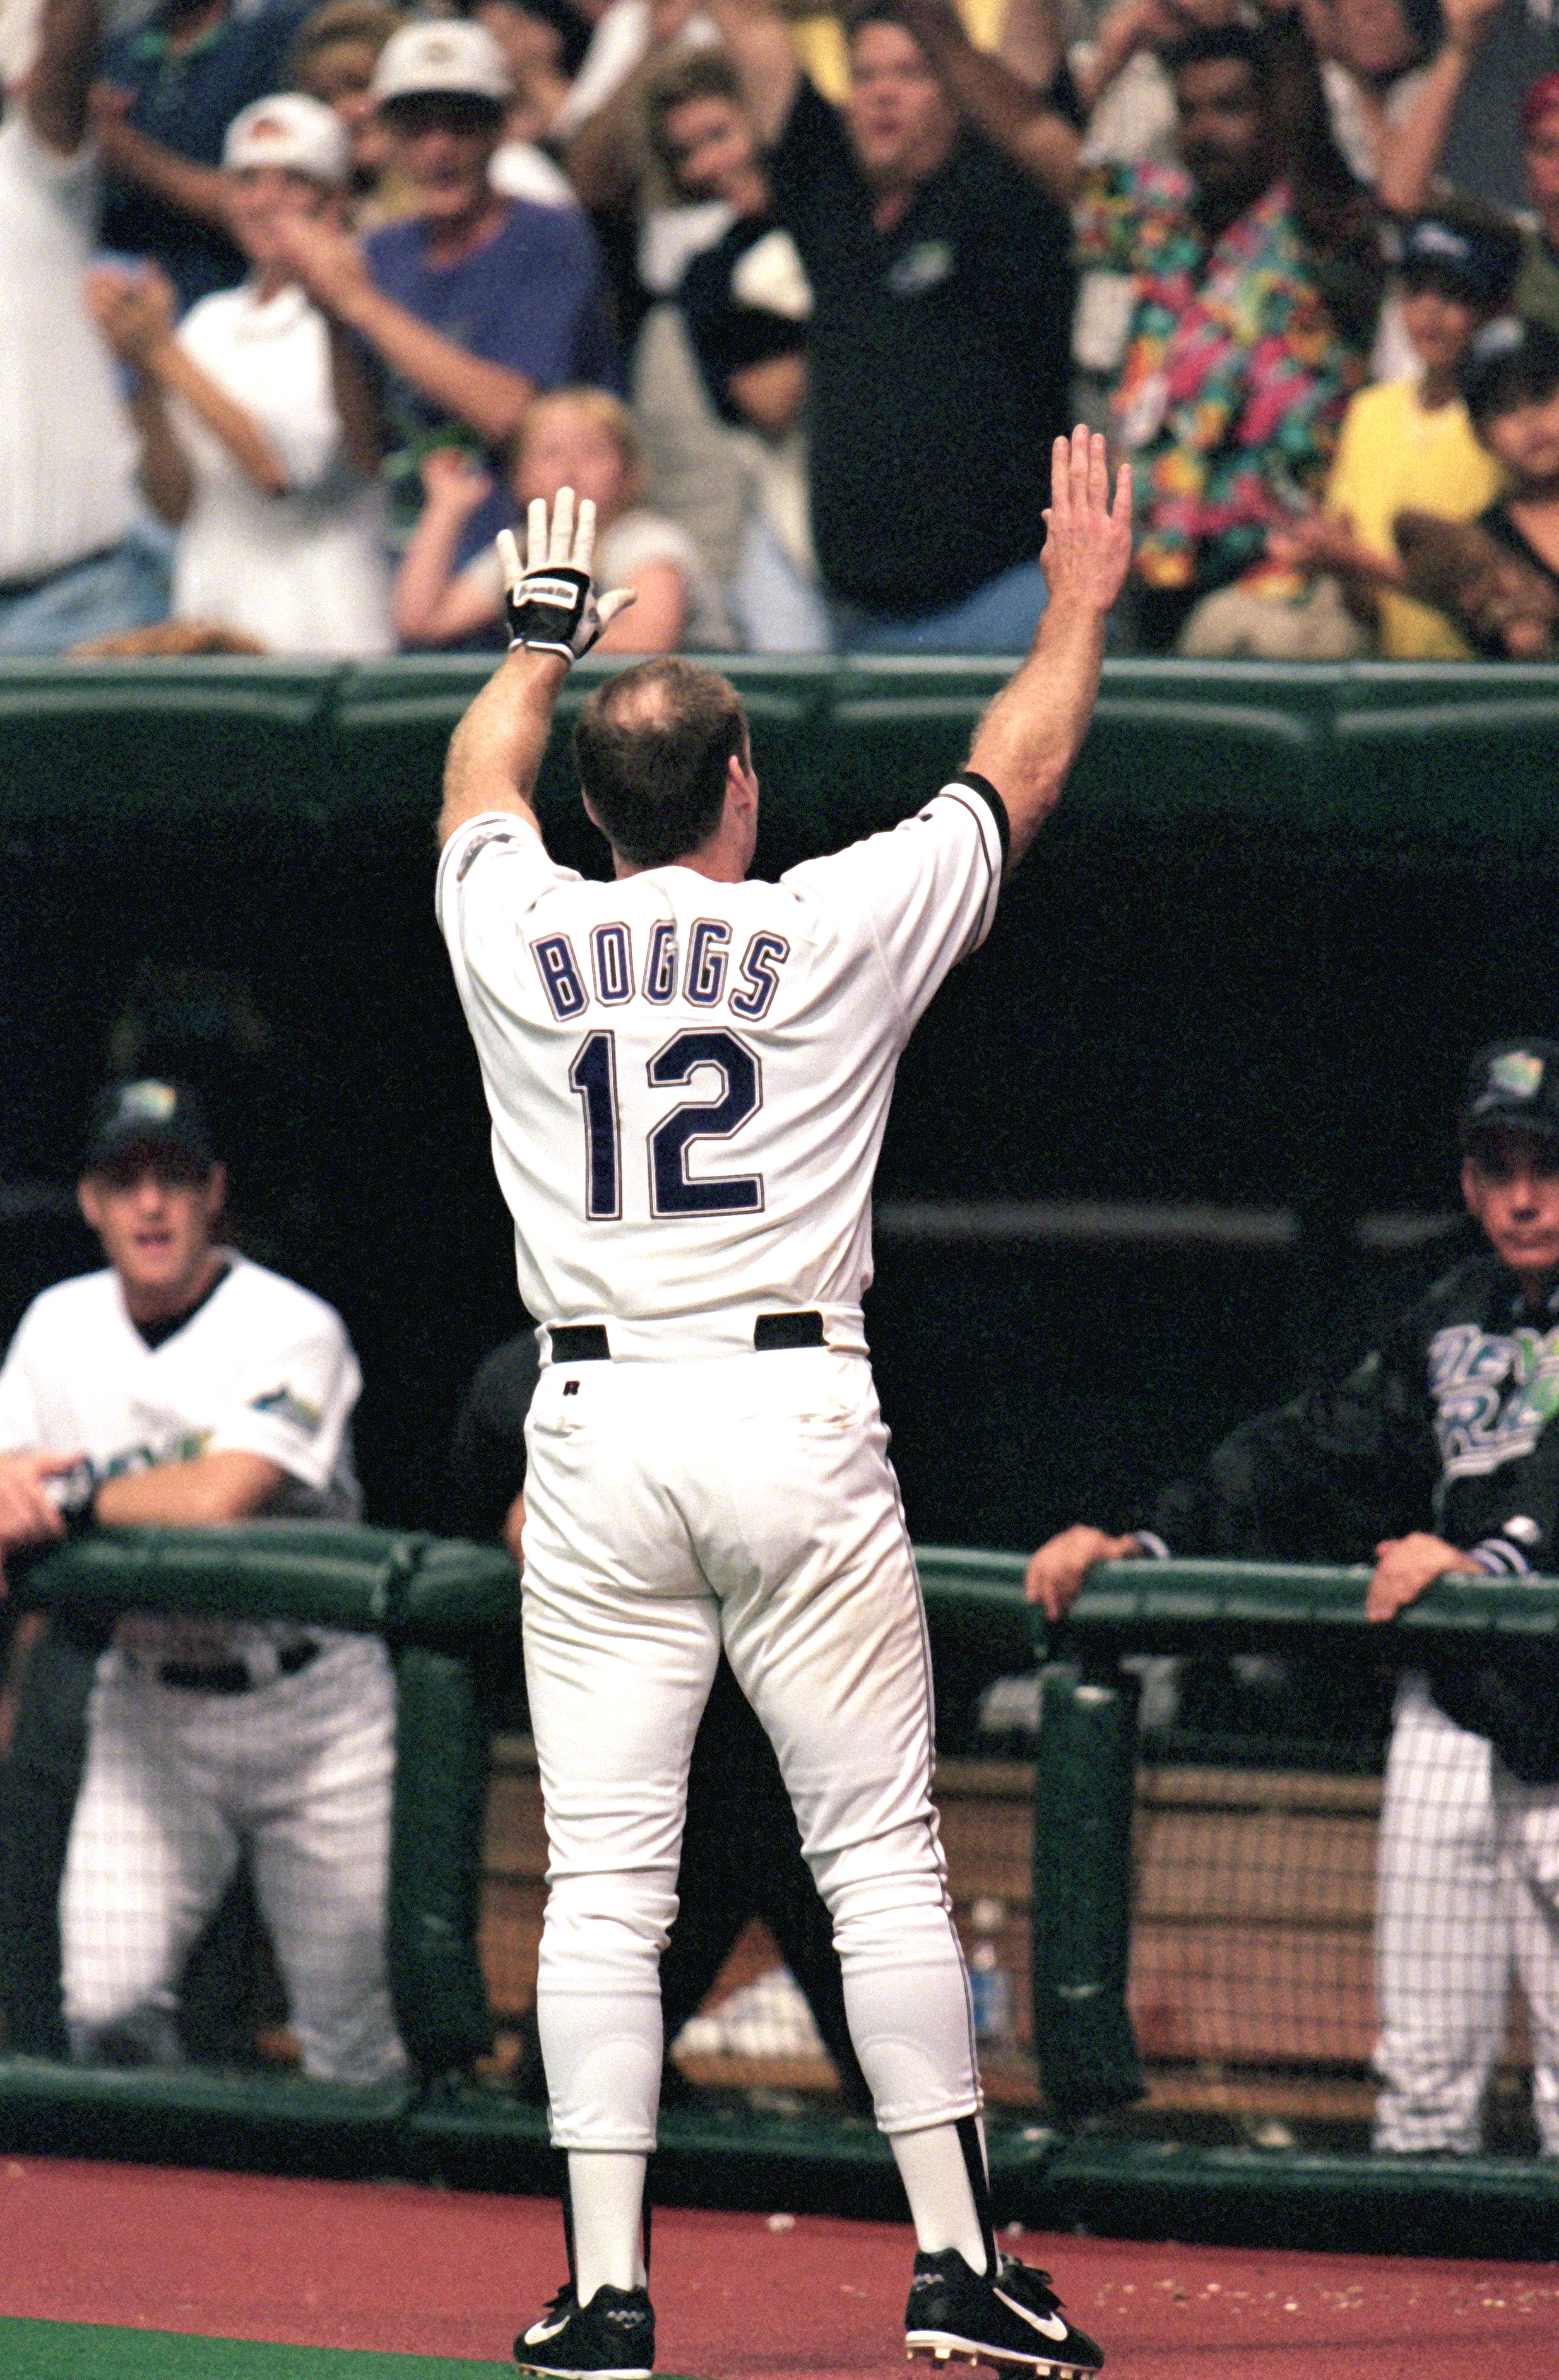 ST. PETERSBURG, FL - AUGUST 7:  Wade Boggs #12 of the Tampa Bay Devils Rays celebrates hitting his 3000th hit with his second home run of the season during the sixth inning against the Cleveland Indians during a game at Tropicana Field on August 7, 1999 i